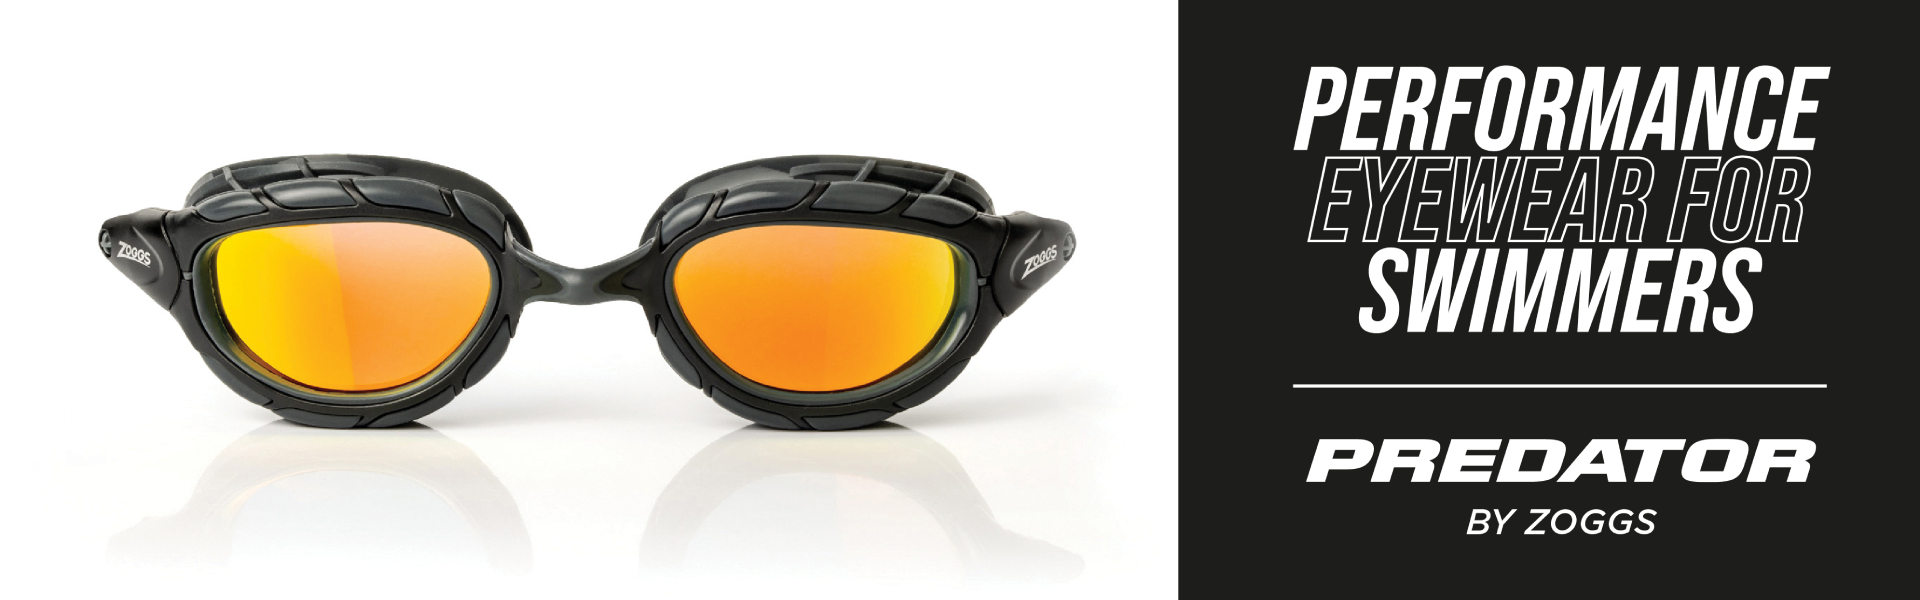 Performance Eyewear for swimmers